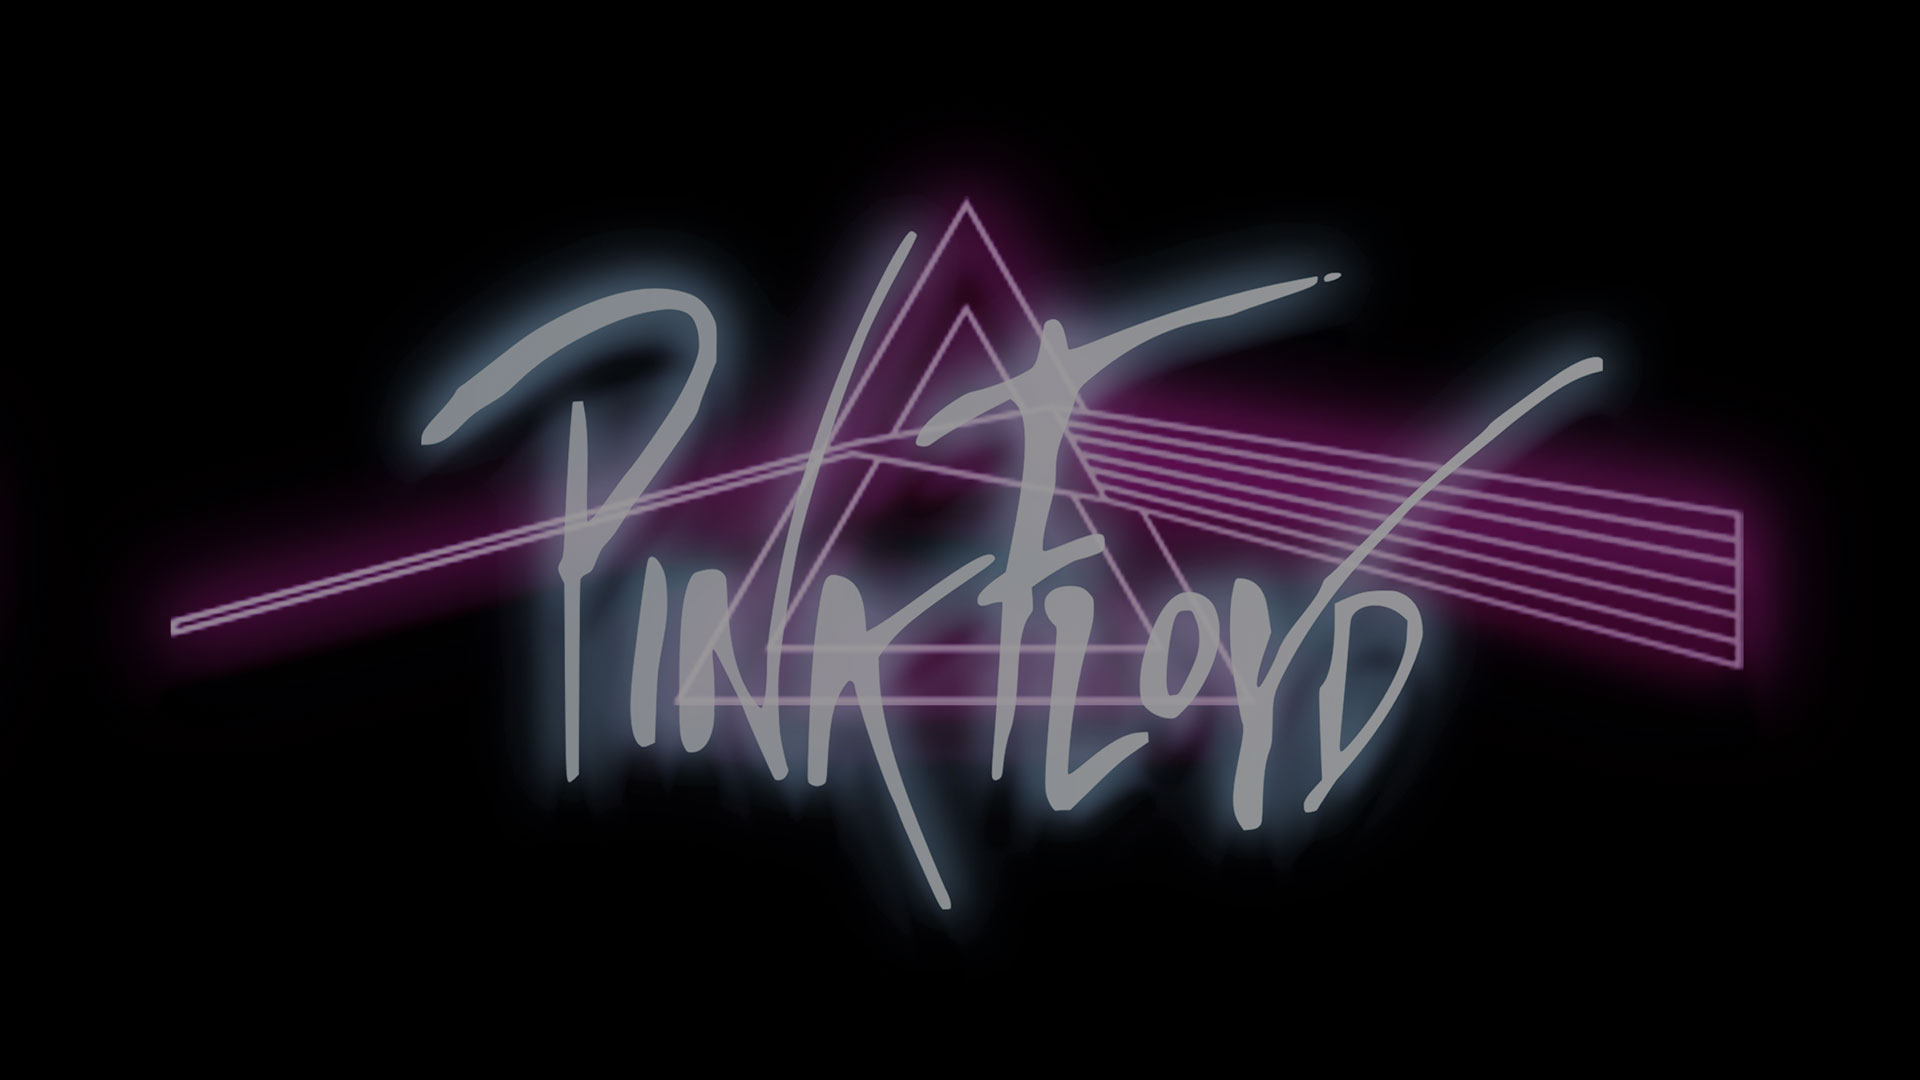 Pink Floyd – The Wall Laser Show